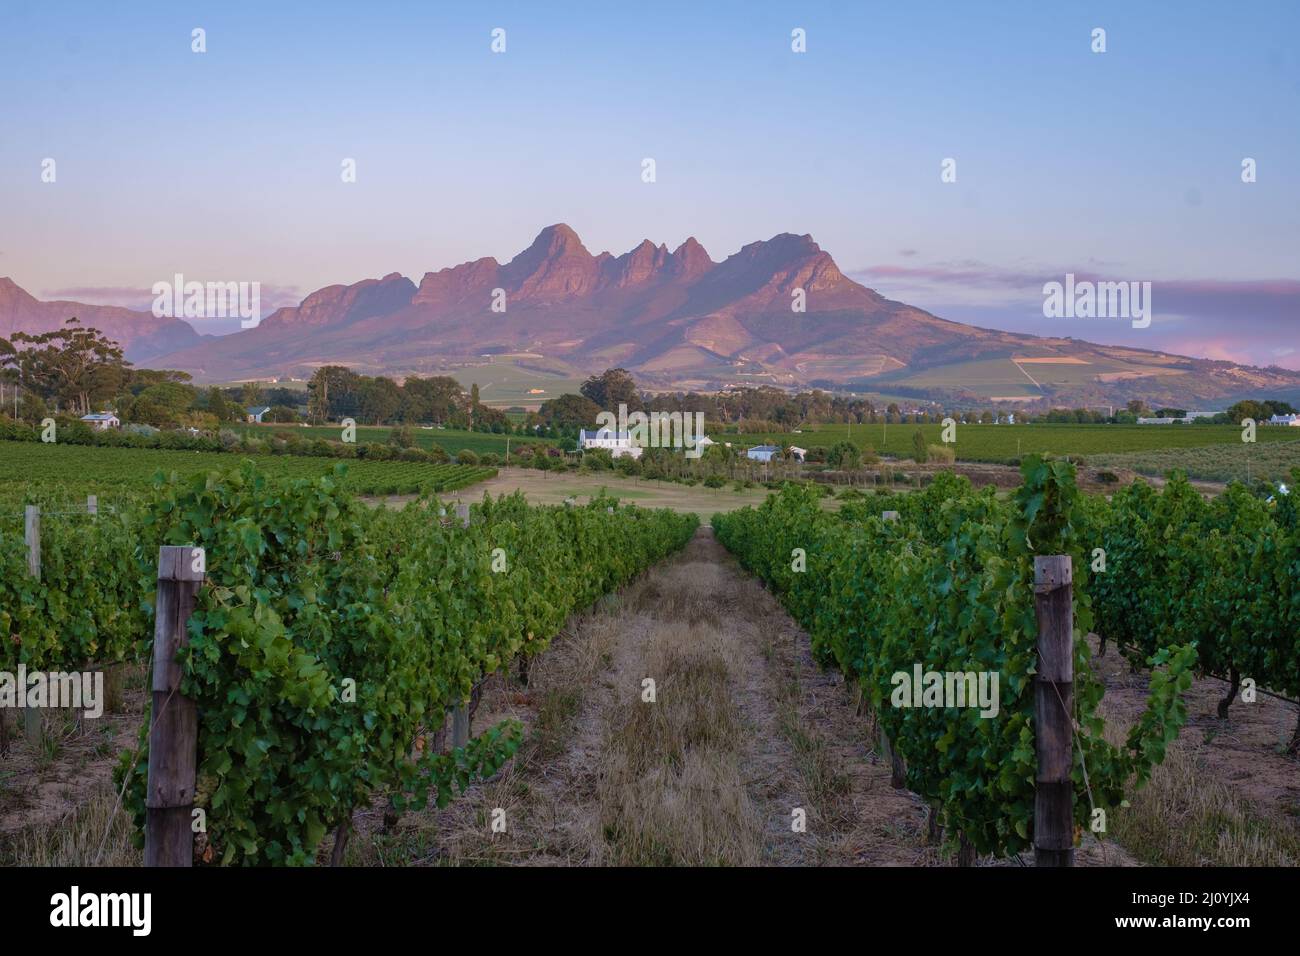 Vineyard landscape at sunset with mountains in Stellenbosch, near Cape Town, South Africa Stock Photo